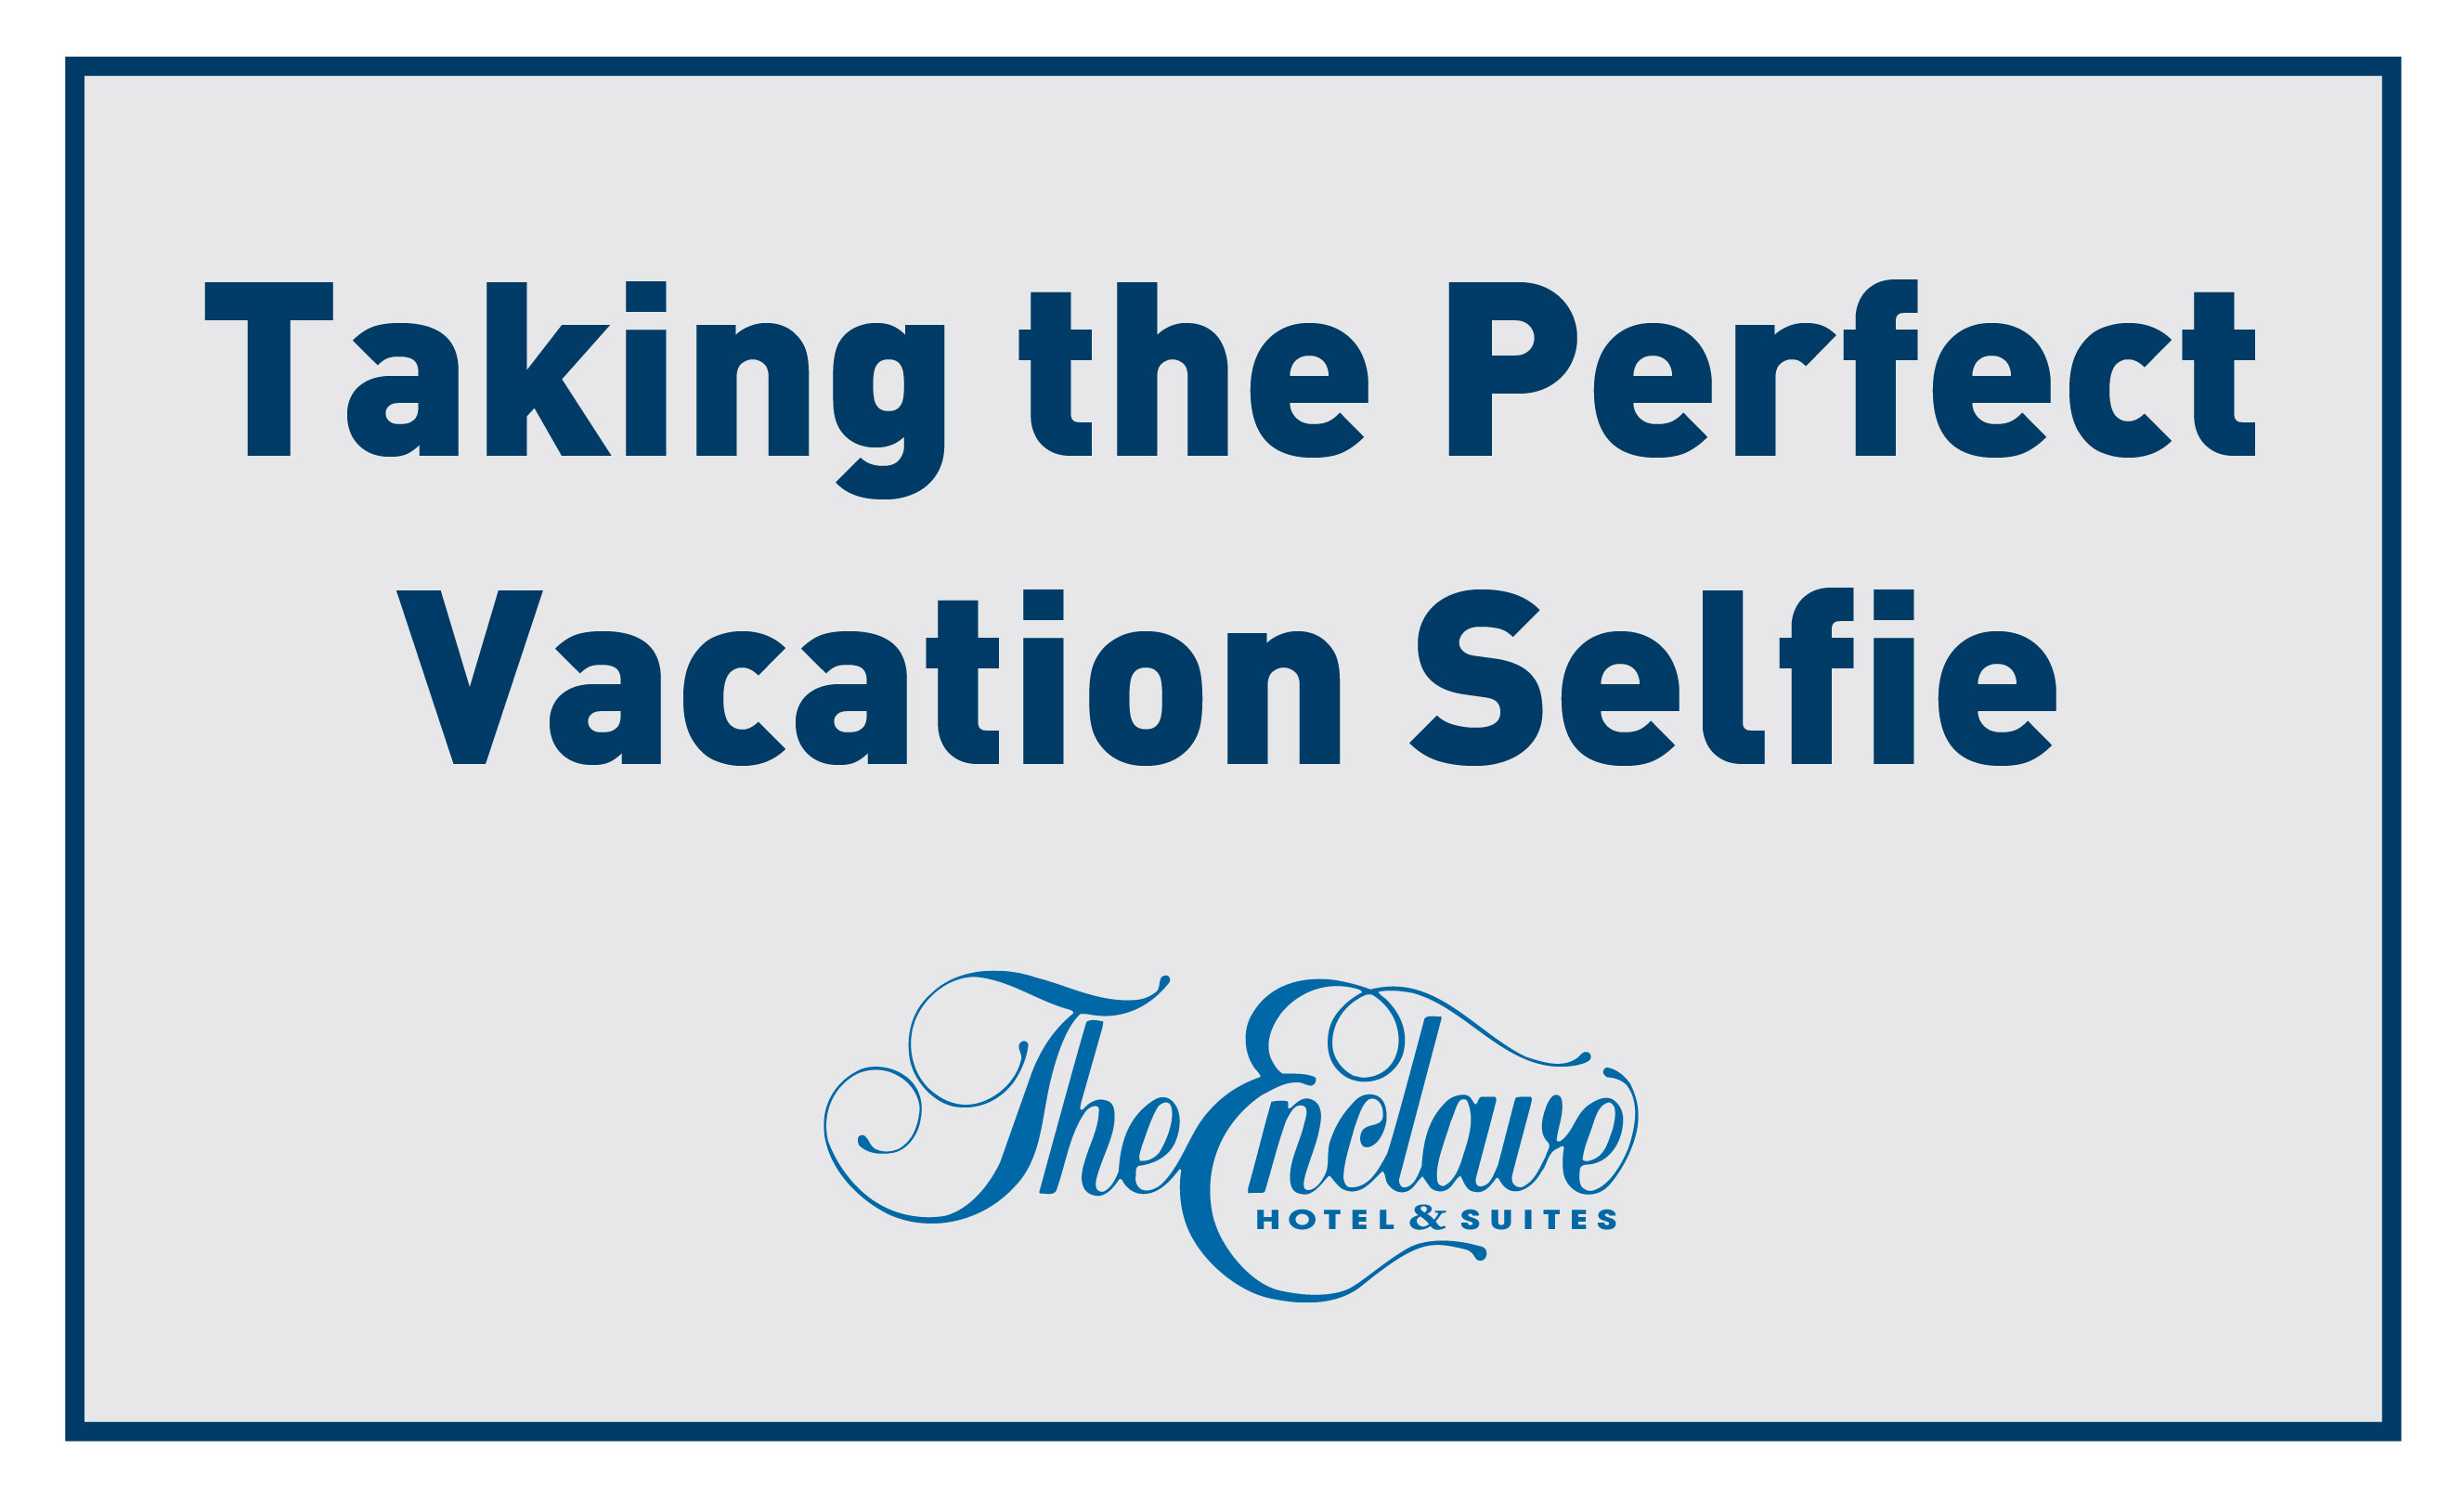 Taking the Perfect Vacation Selfie